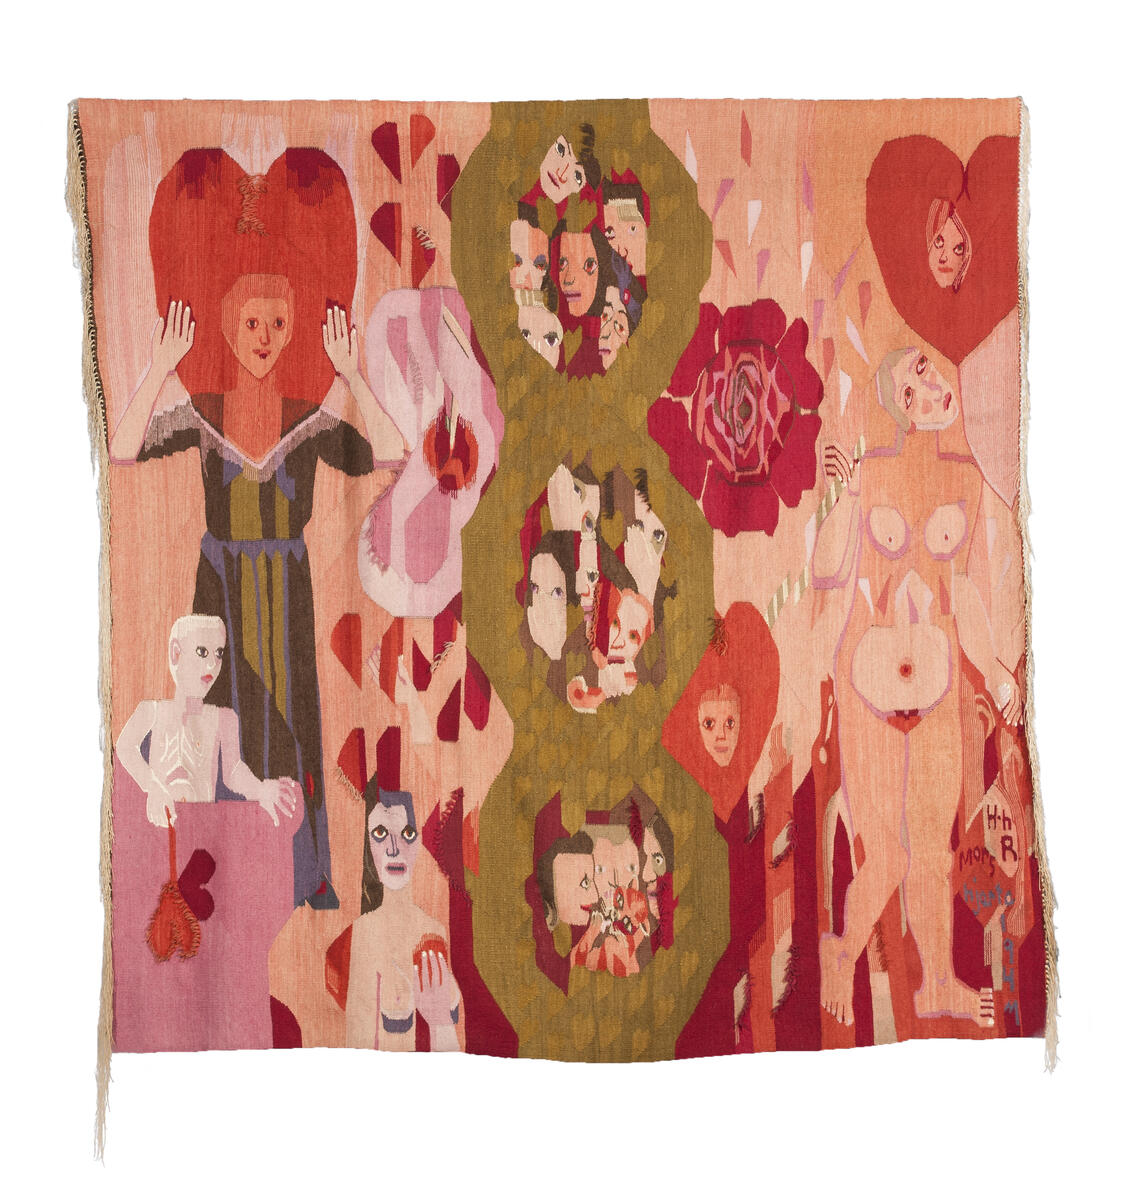 Hannah Ryggen, "Mother's Heart" (1947). Tapestry in wool and linen. In the collection of Nordenfjeldske Kunstindustrimuseum. Photo: Anders S. Solberg. © Hannah Ryggen / BONO 2022 (Foto/Photo)